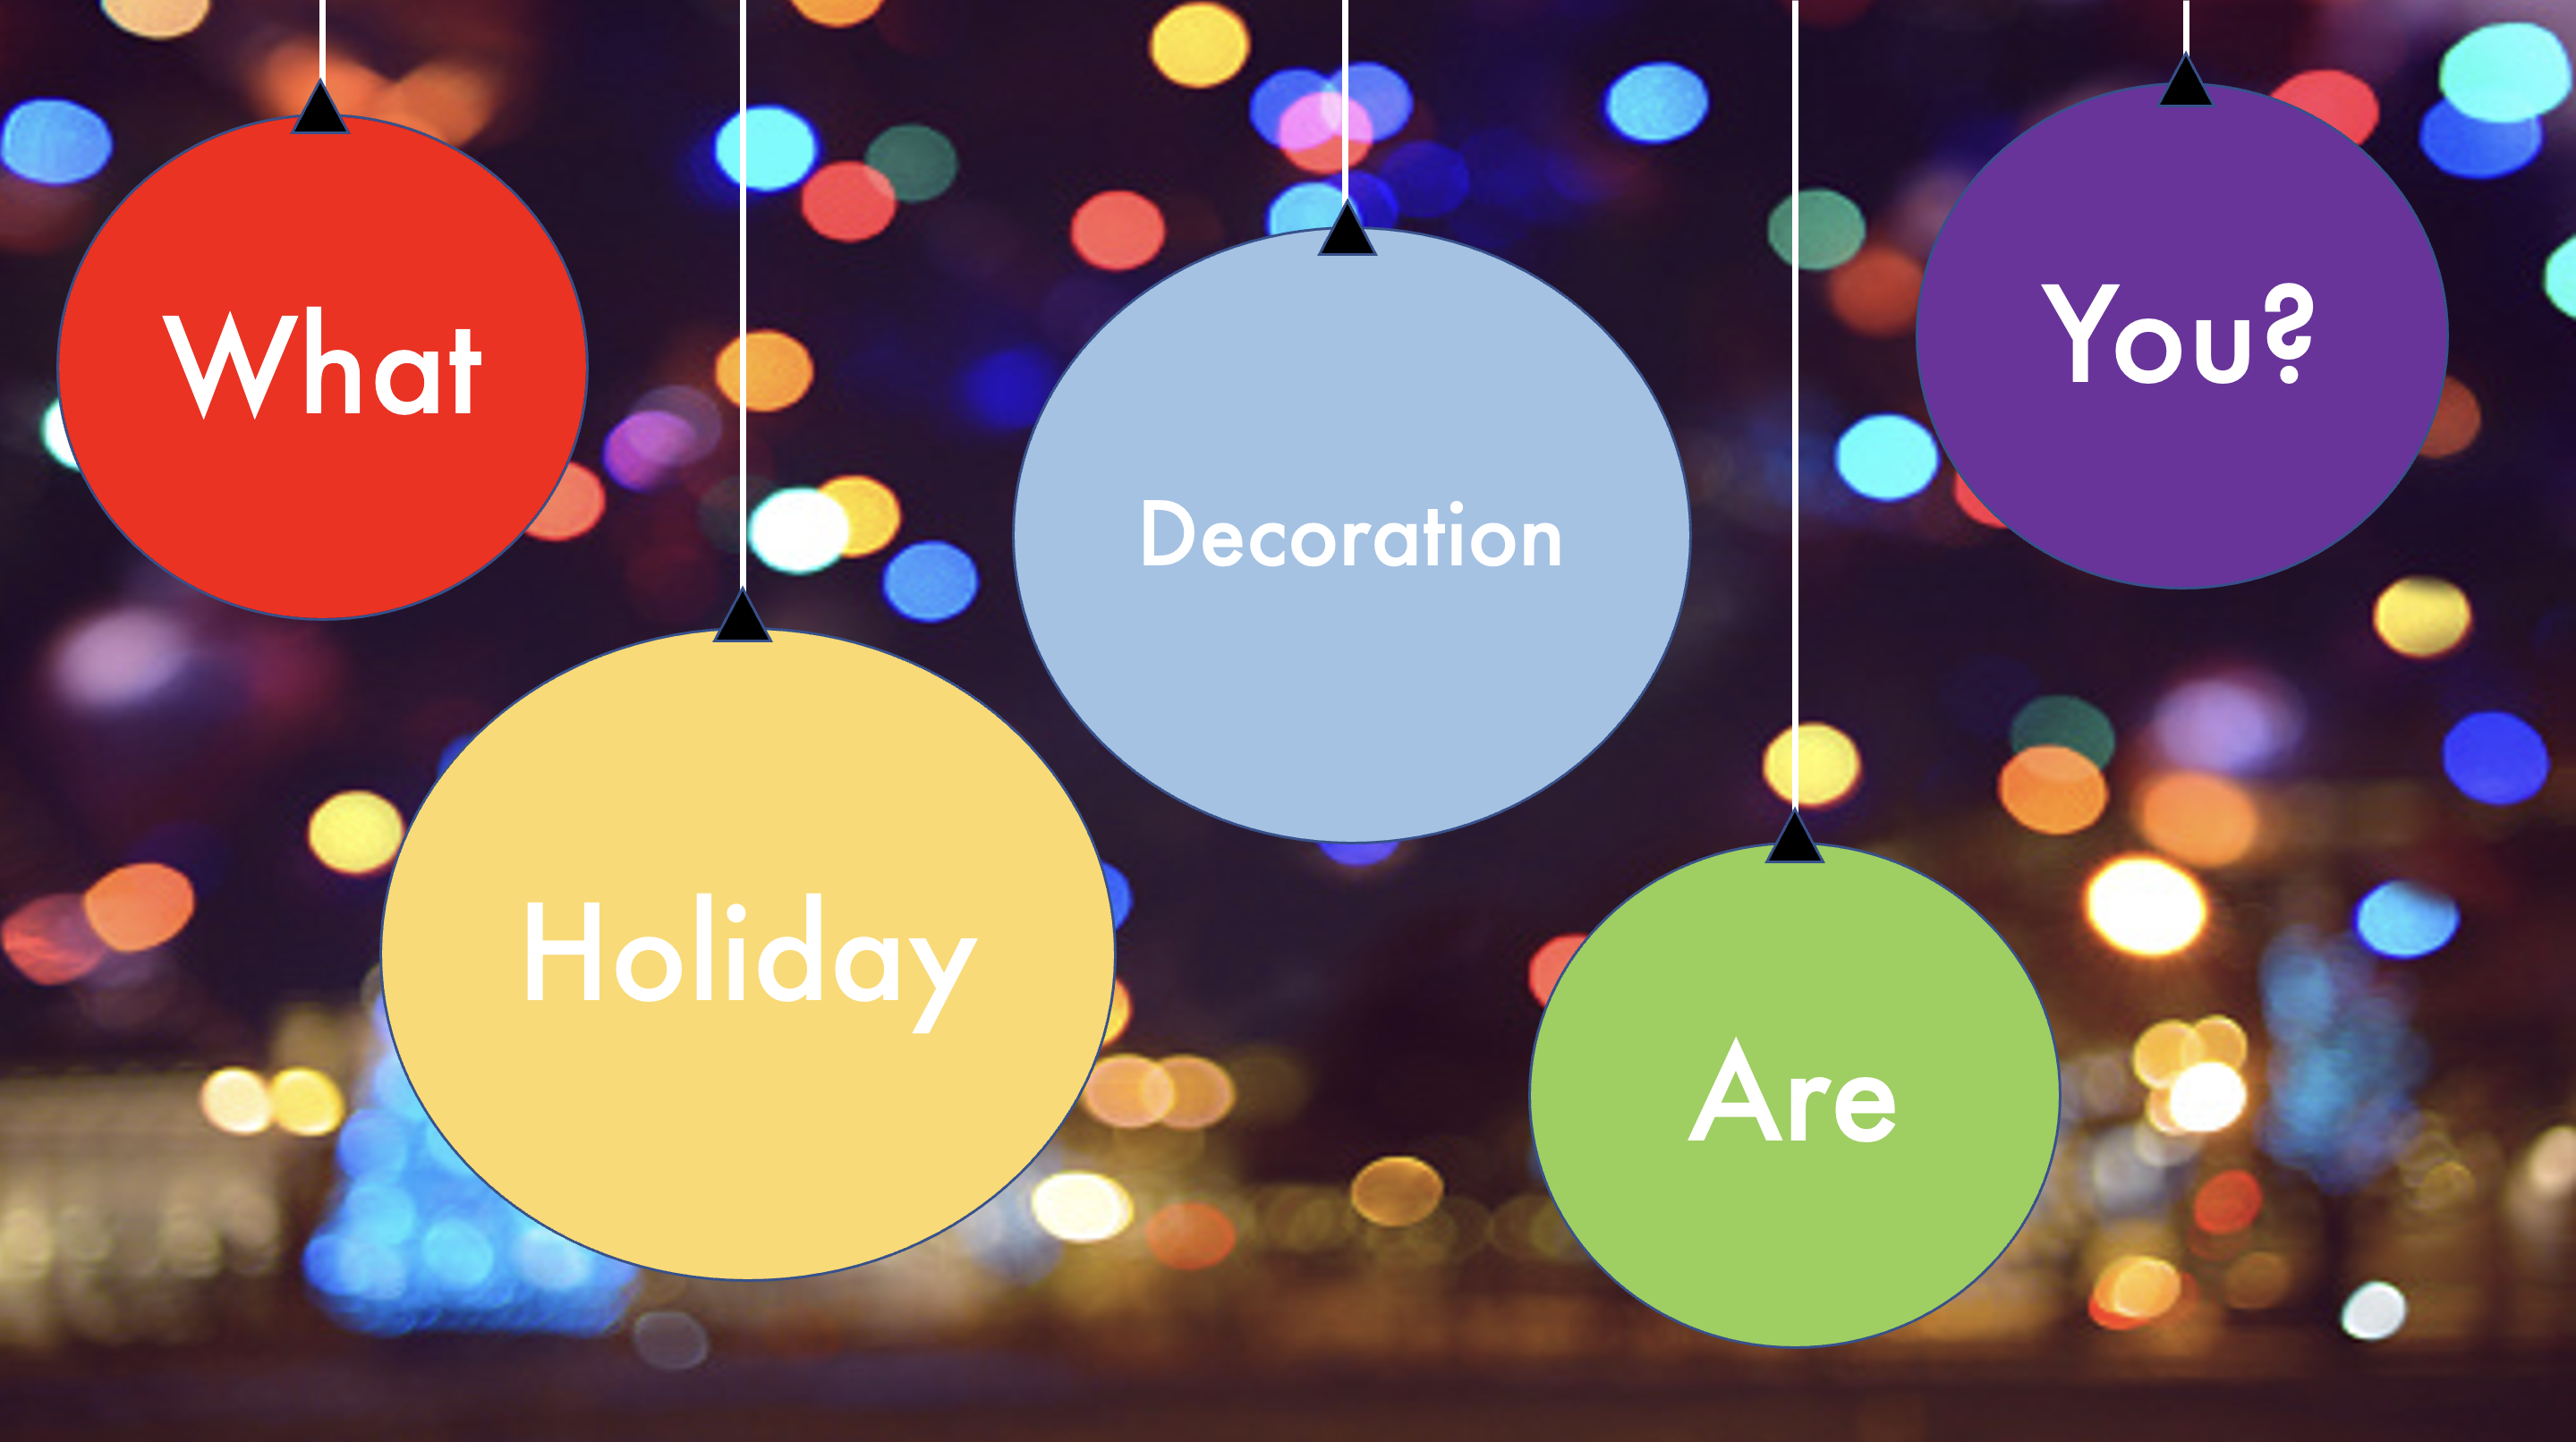 PowerPoint night (Holiday Edition): 10 Topics for some inspiration